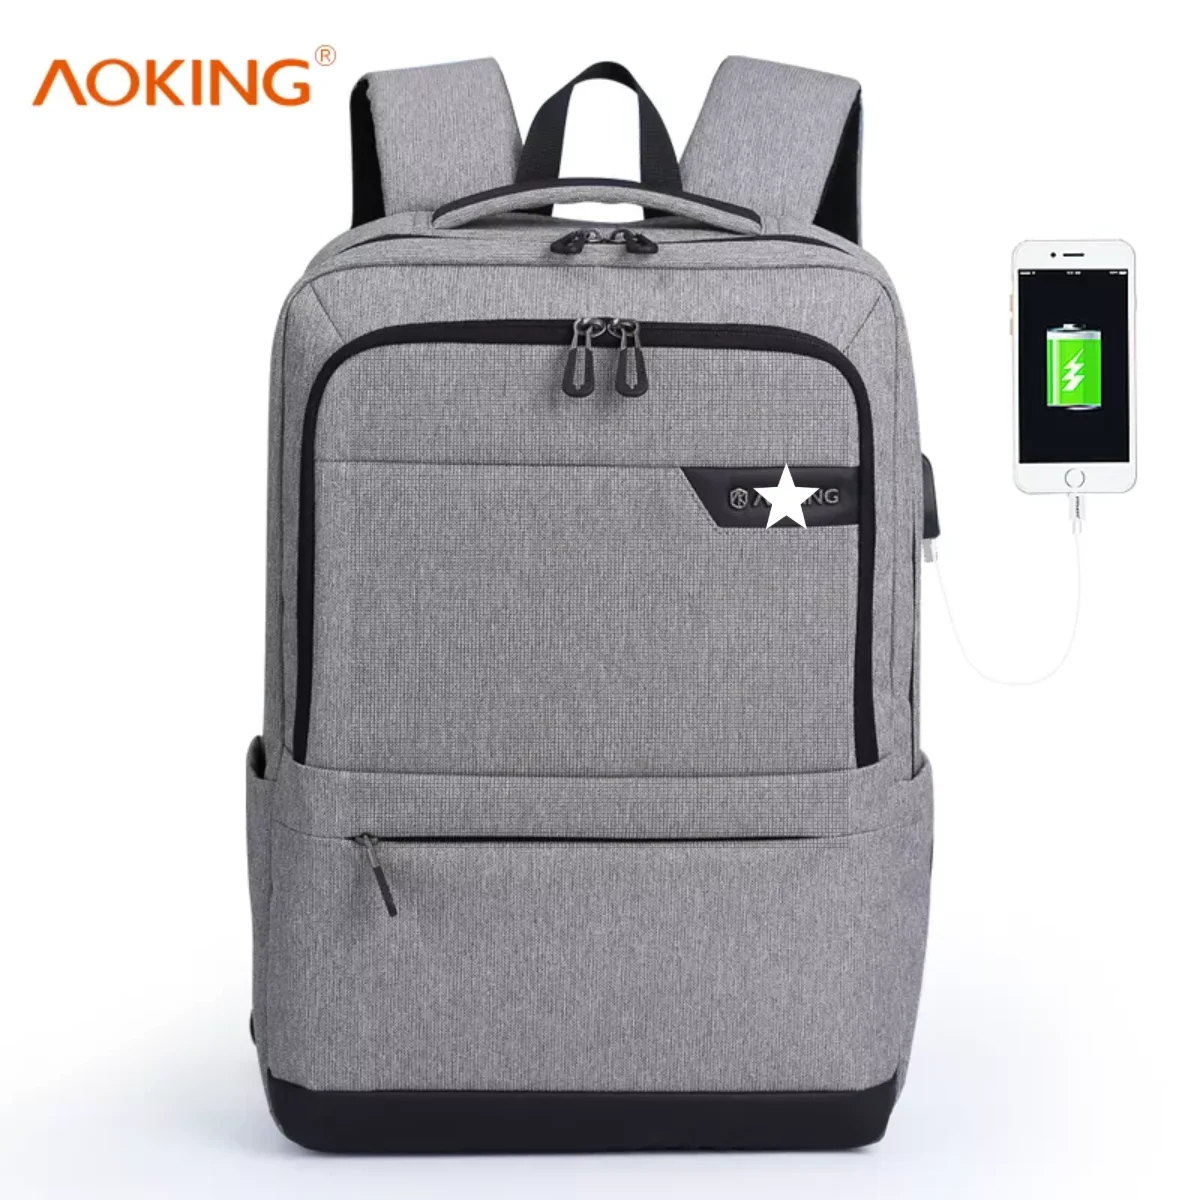 2020 Waterproof Fabric Mochilas Men Waterproof Traveling Smart Bag Backpack Usb Zaino Back Pack Backpack With Charger Buy Backpack Usb Smart Bag Backpack With Charger Product On Alibaba Com